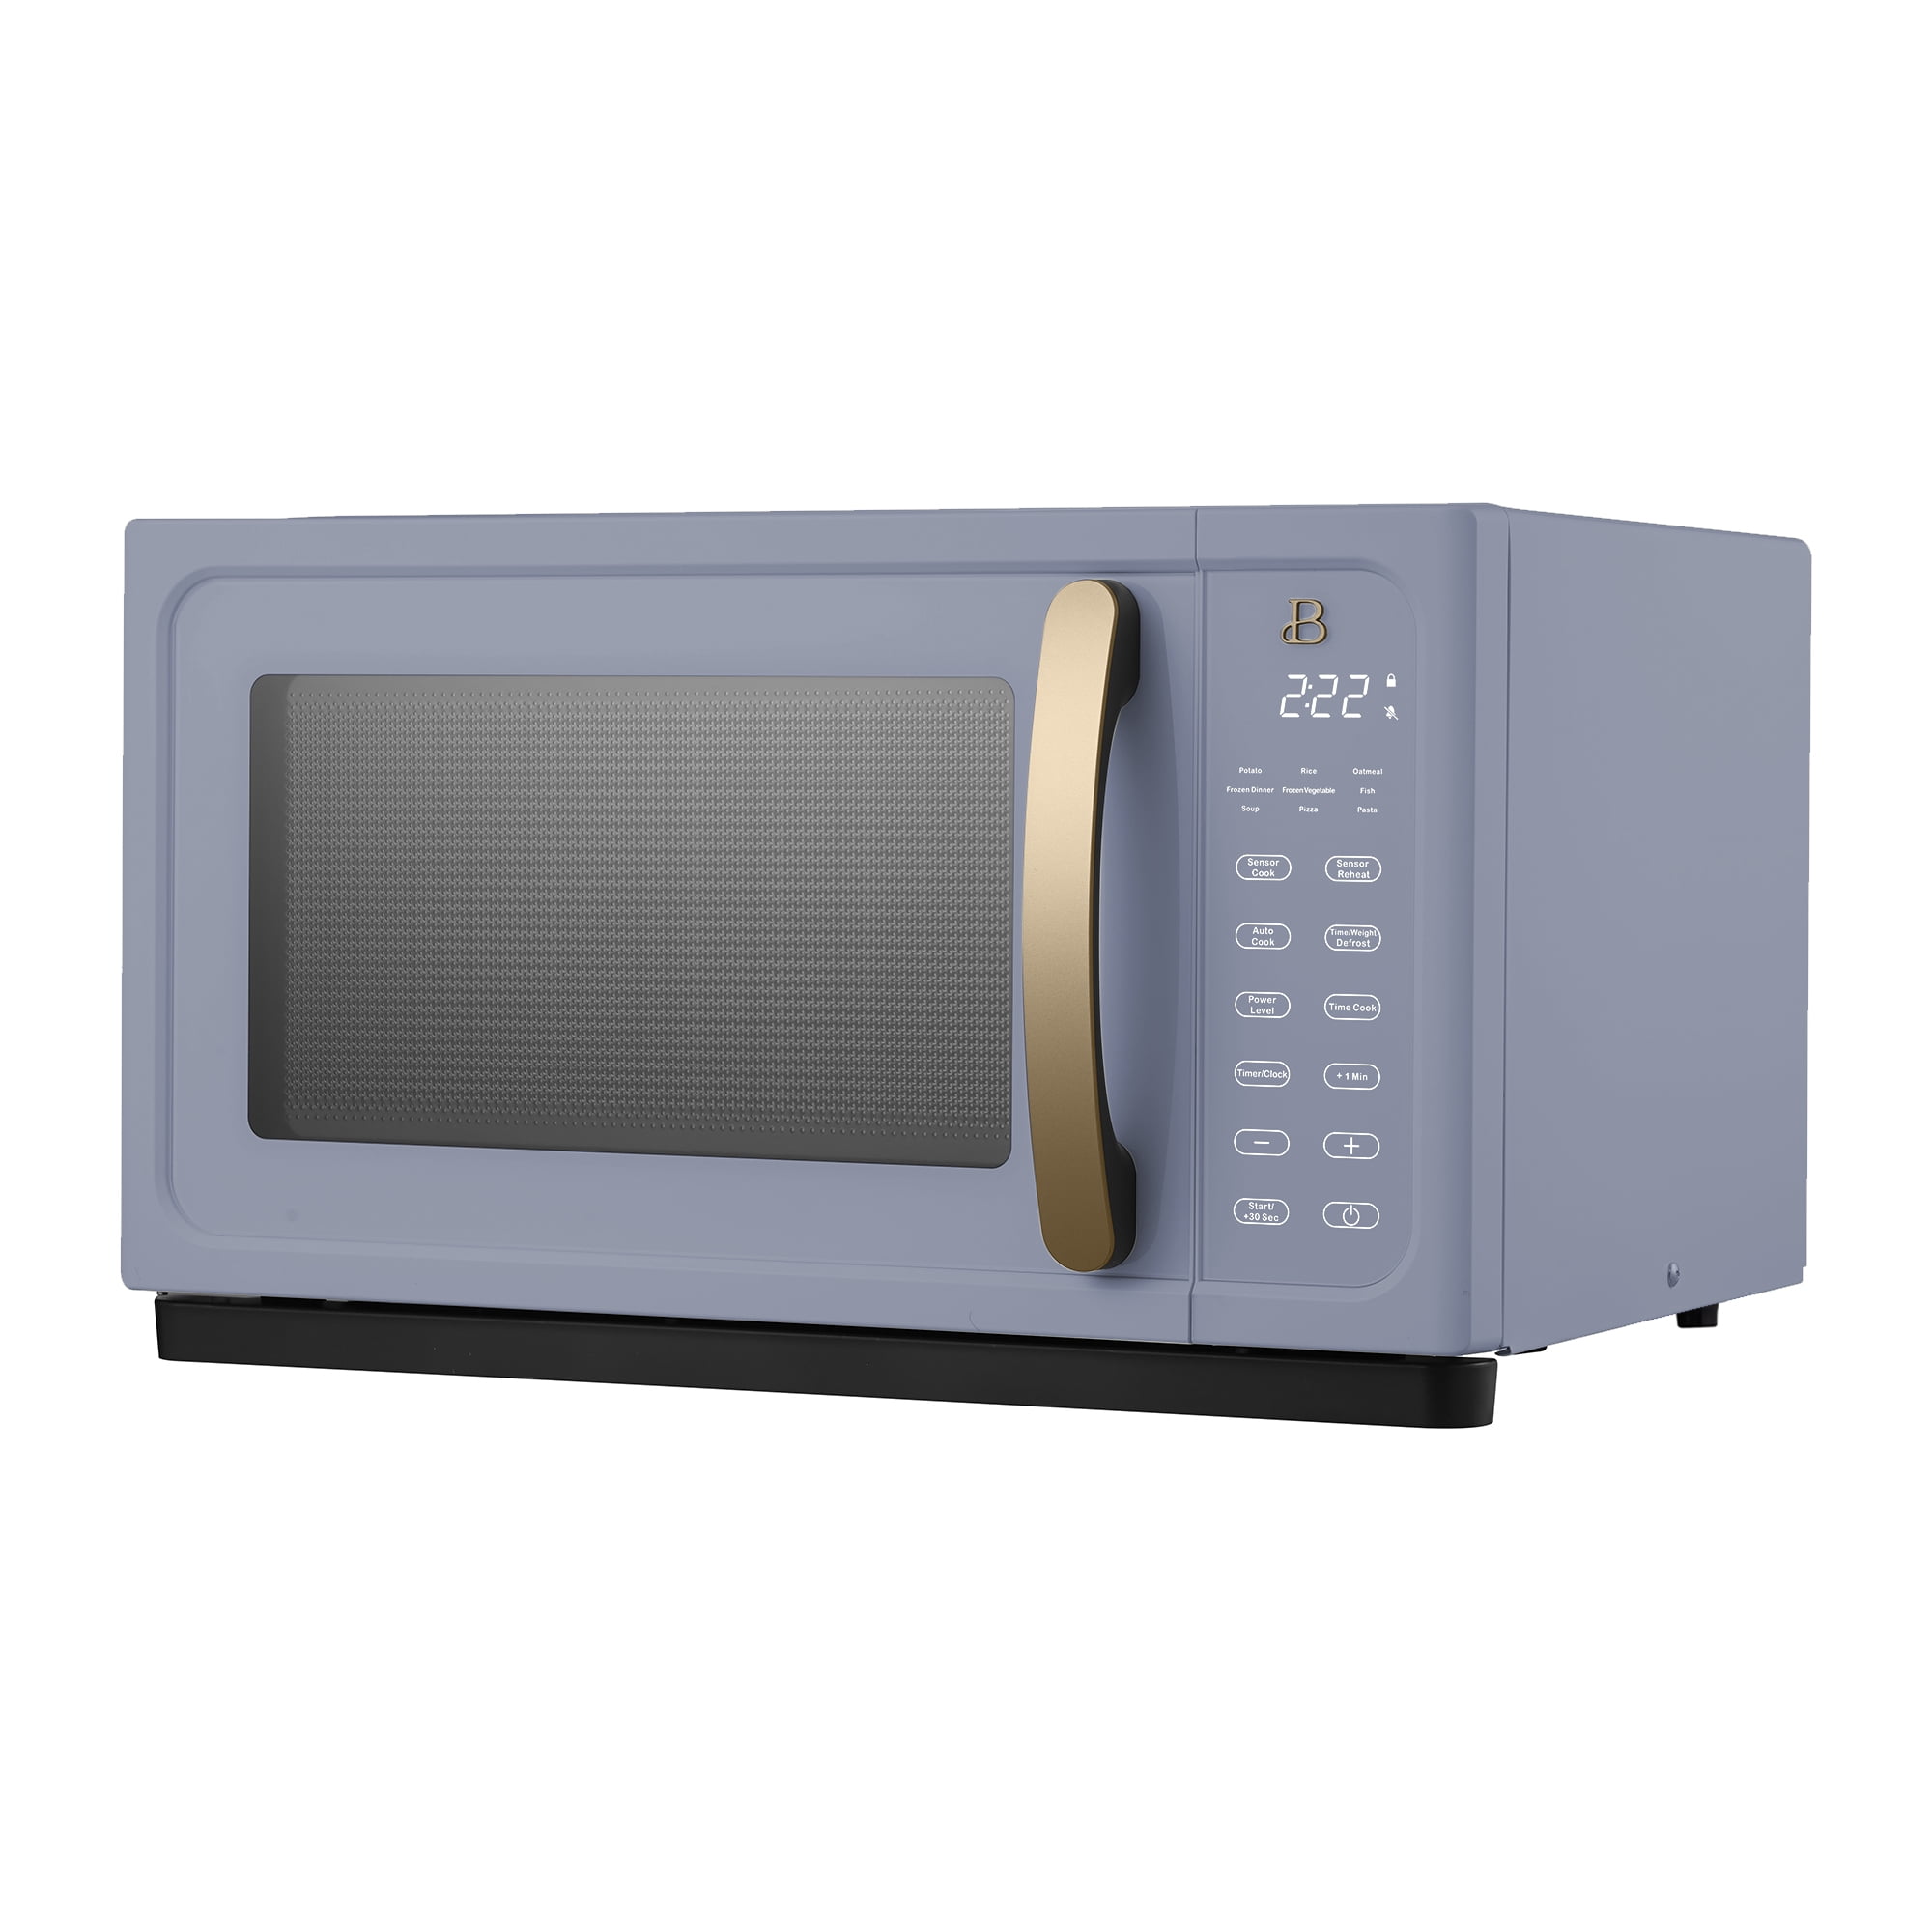 Cheap microwave: what you should keep in mind - Coolblue - anything for a  smile